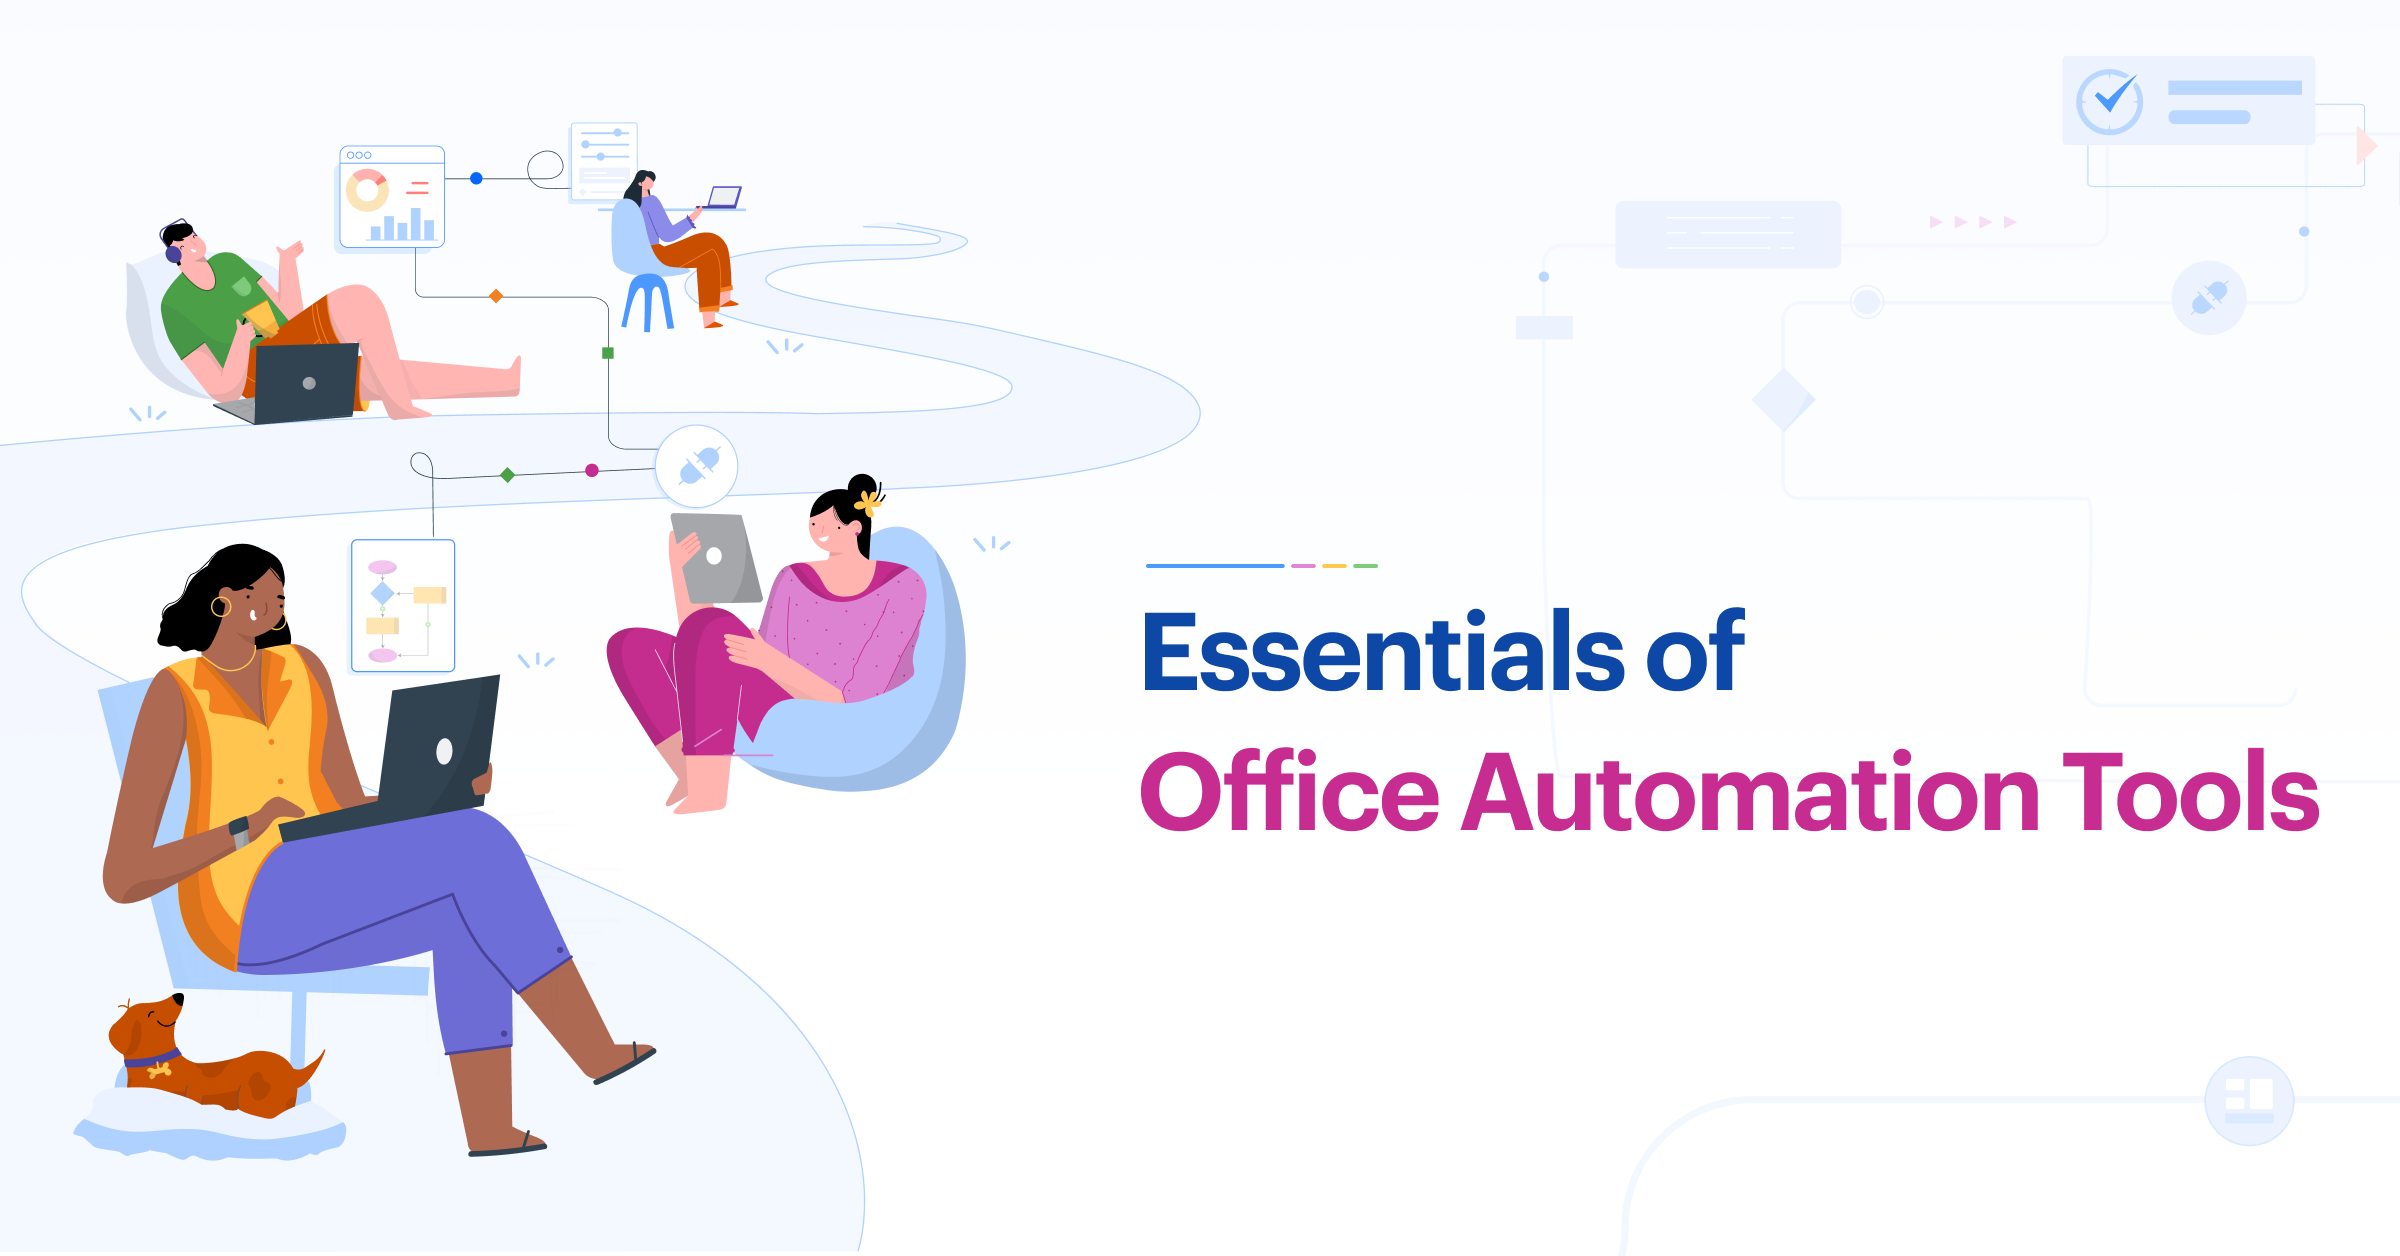 Essentials of Office Automation Tools